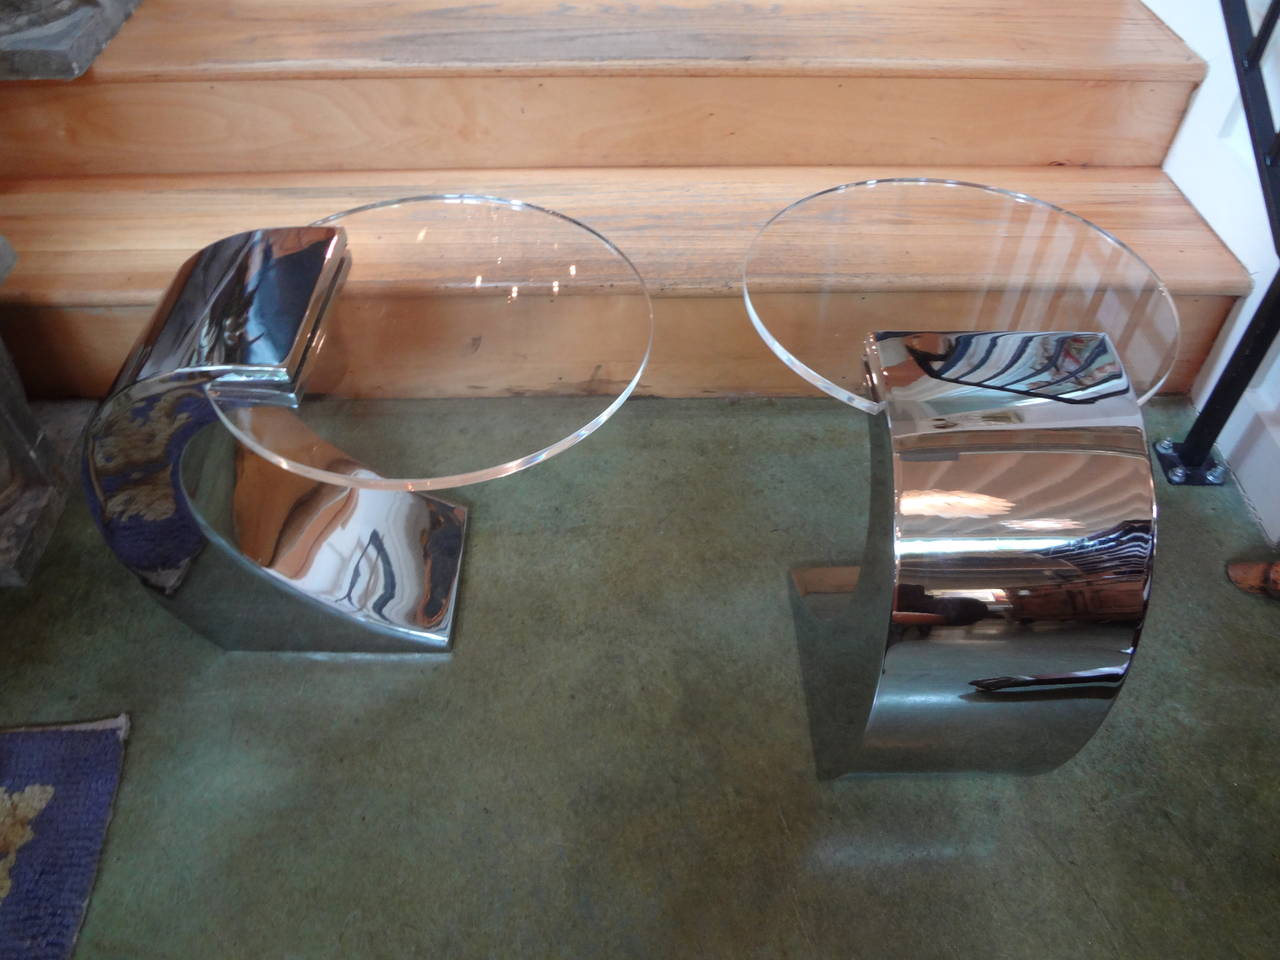 Chic pair of Mid-Century Modern chrome cigarette or side tables with acrylic tops.

Please click KIRBY ANTIQUES logo below to view additional pieces from our vast inventory.